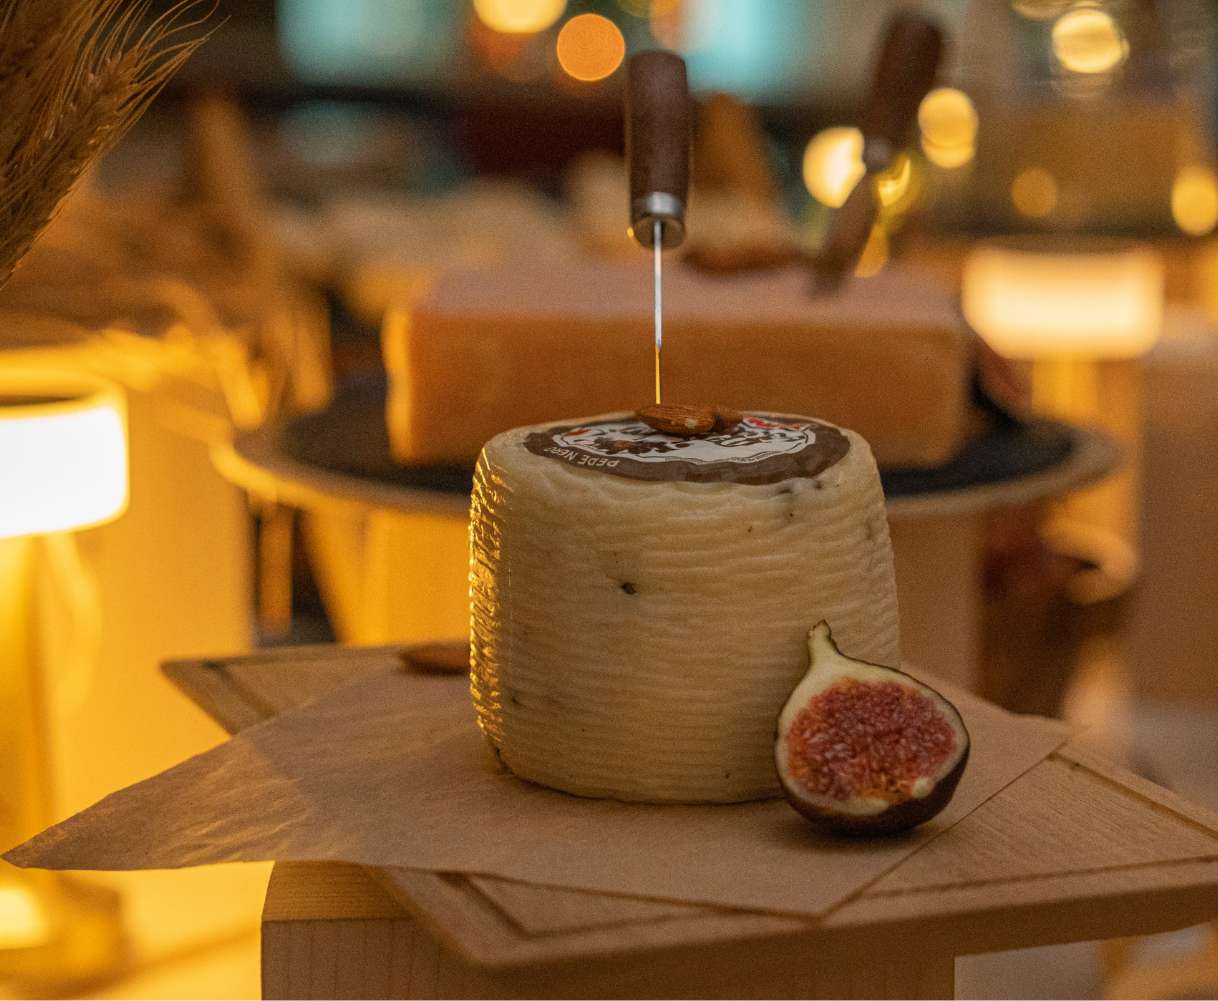 A block of cheese and a sliced fig on a table.